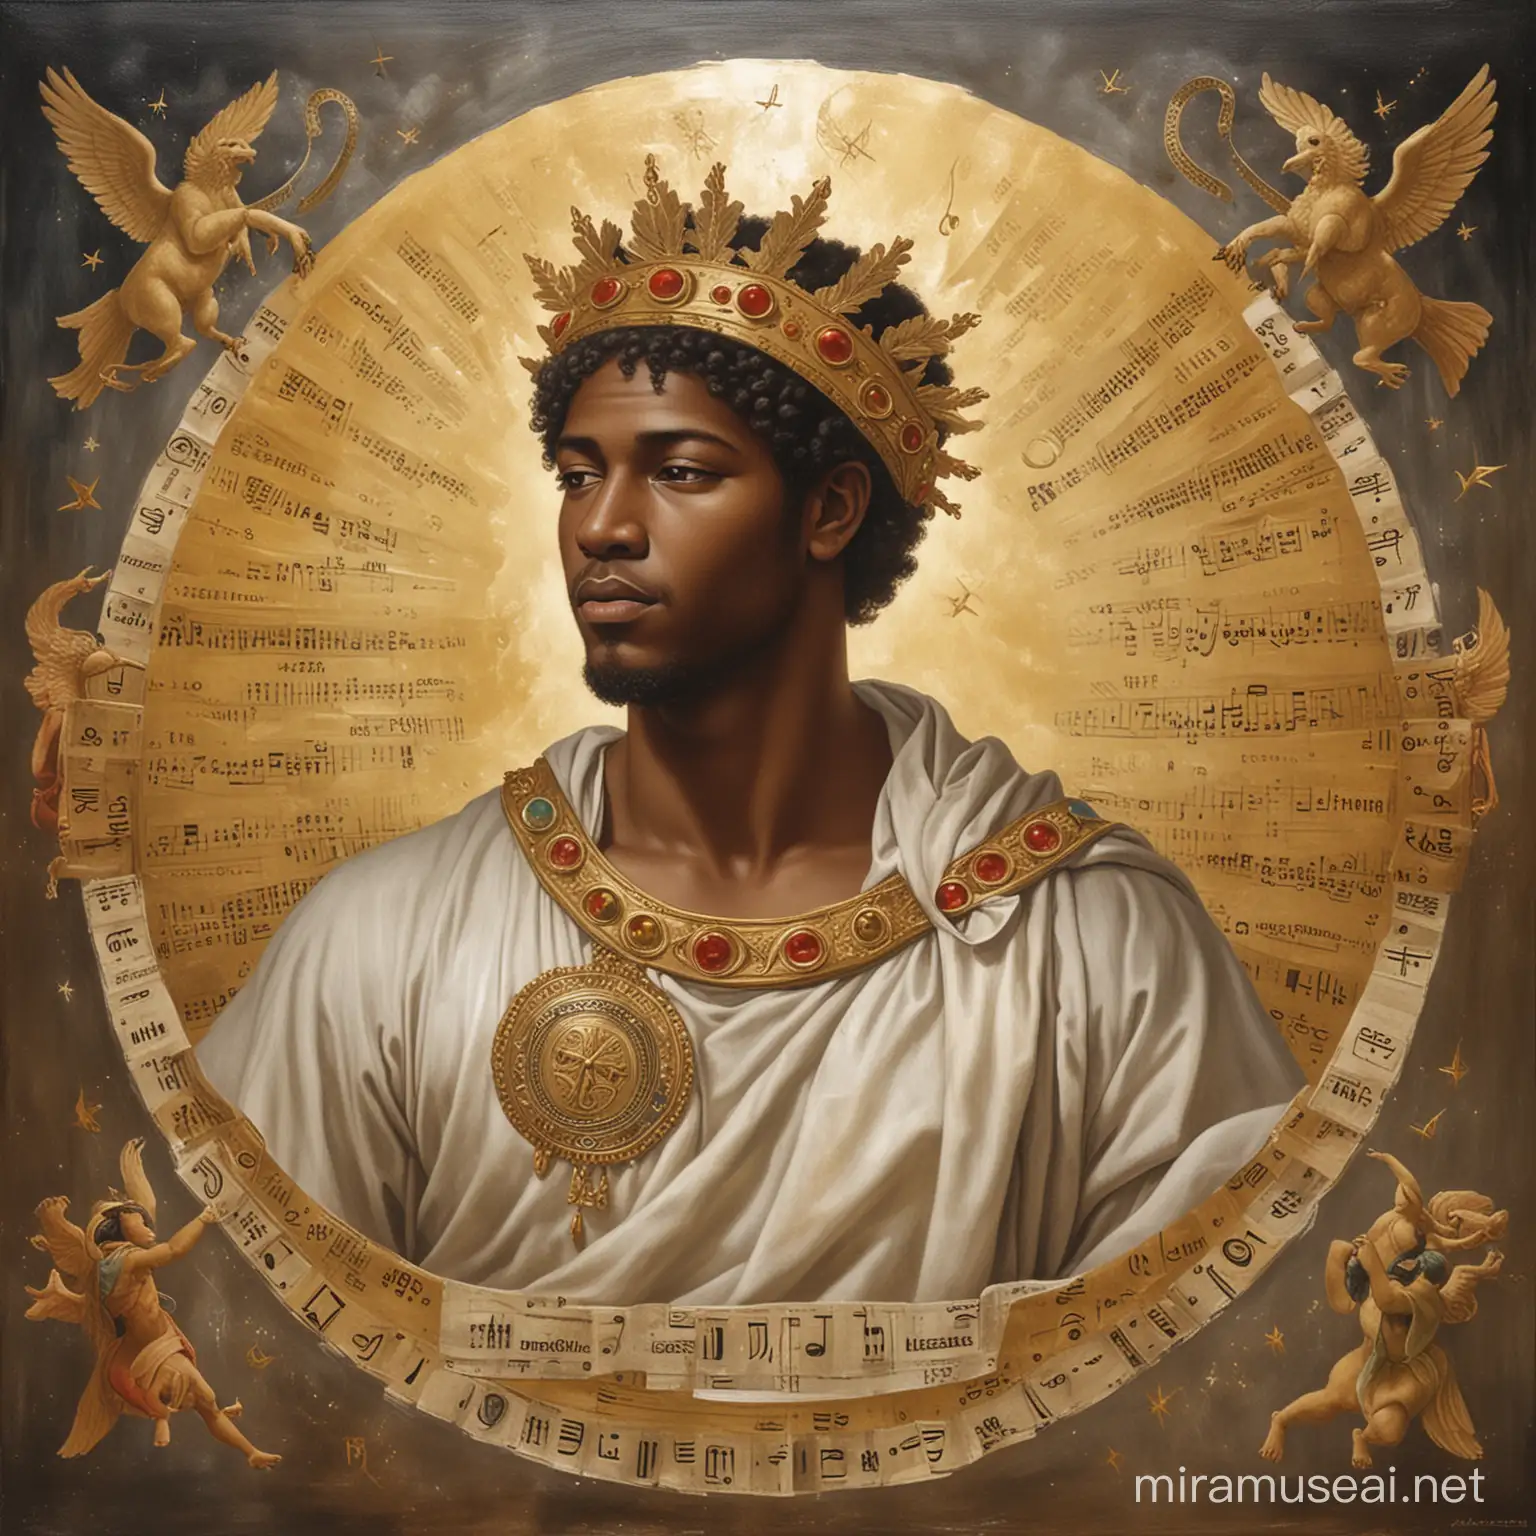 Apollo GOD OF MUSIC Hip-hop,The image is a religious painting of a person with tags related to art, painting, and mythology.